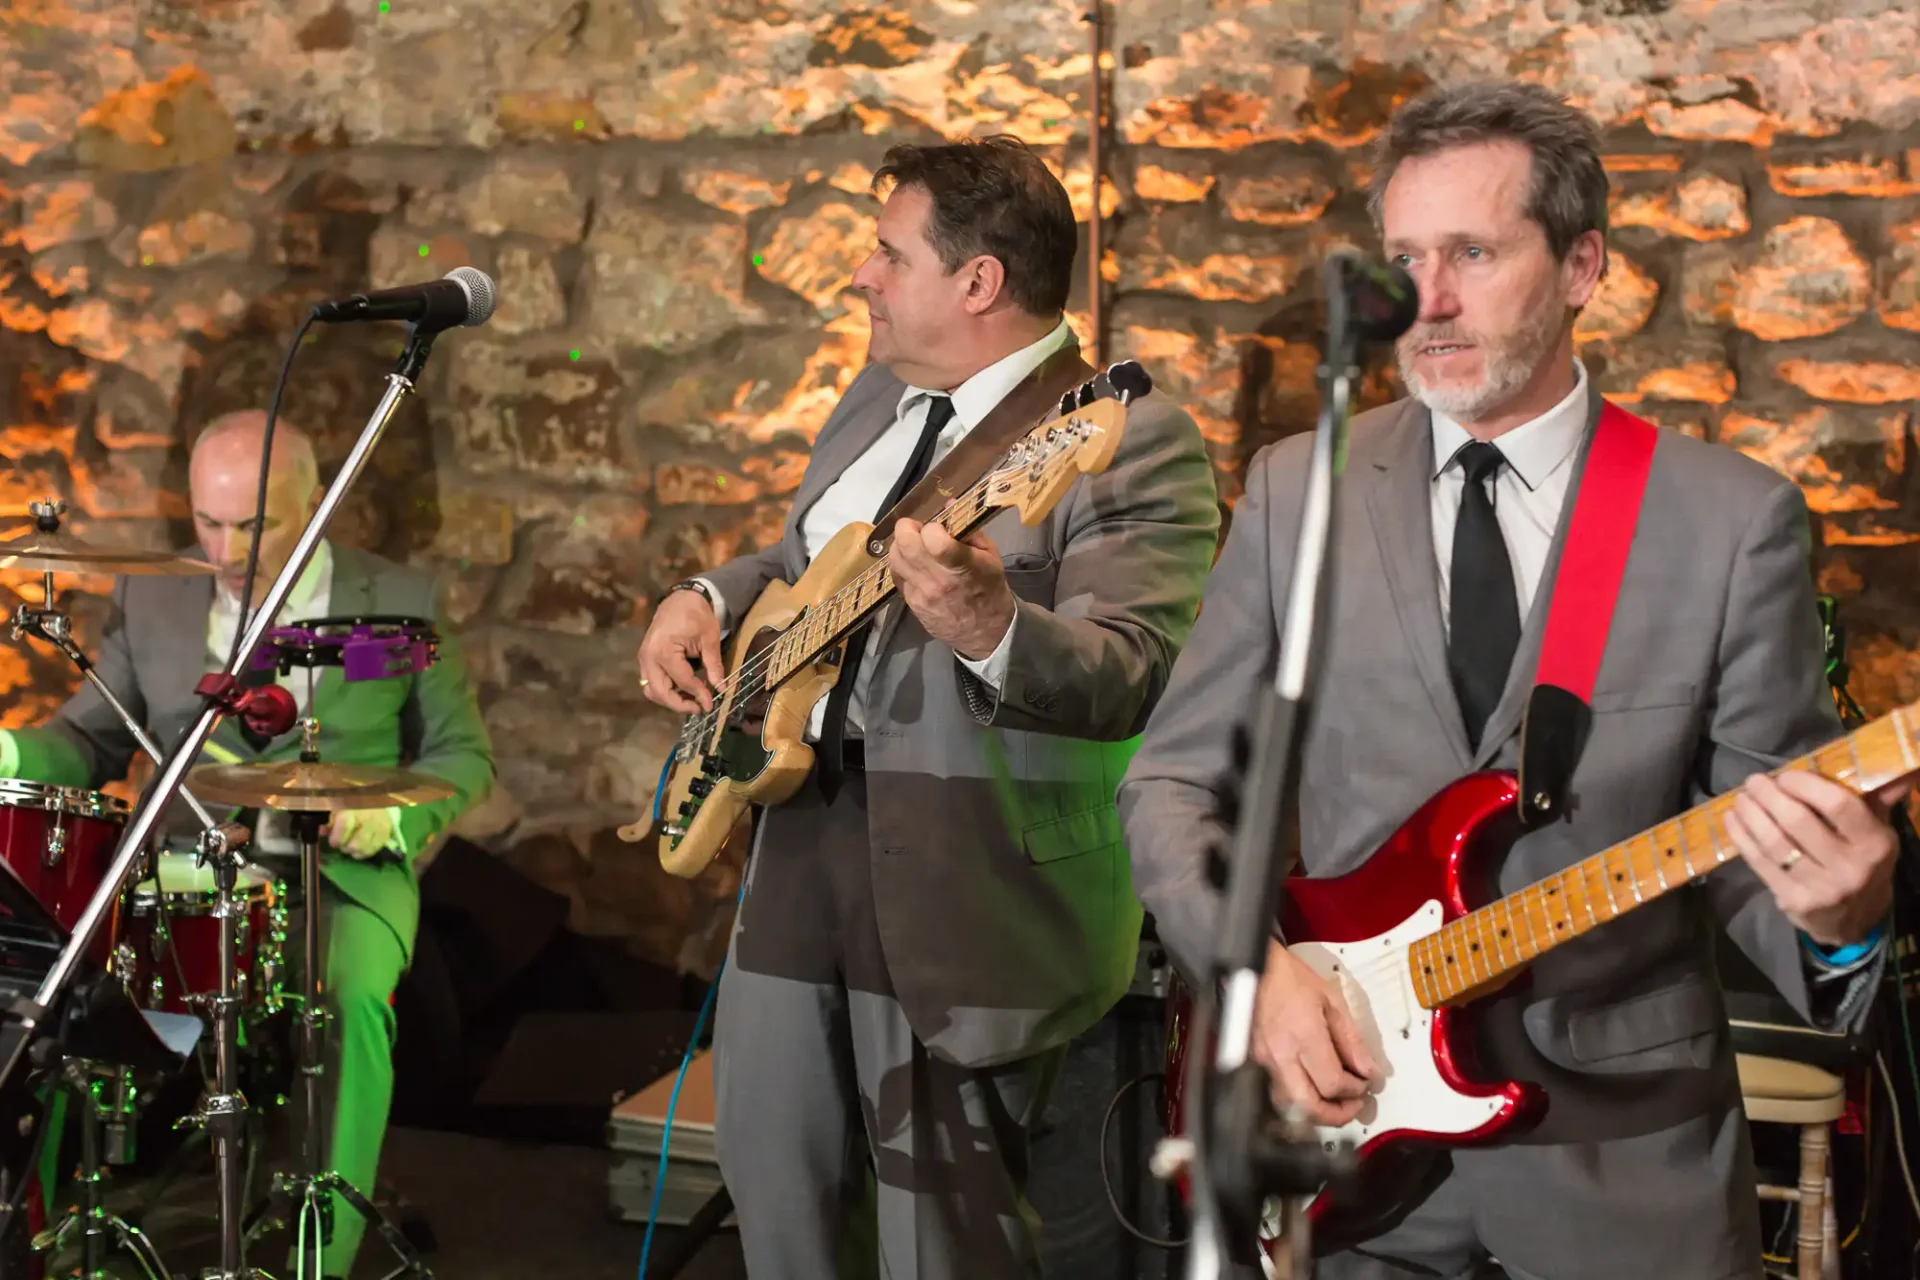 Three middle-aged men perform in a band at an indoor event, playing drums and electric guitars, against a rustic stone wall backdrop.